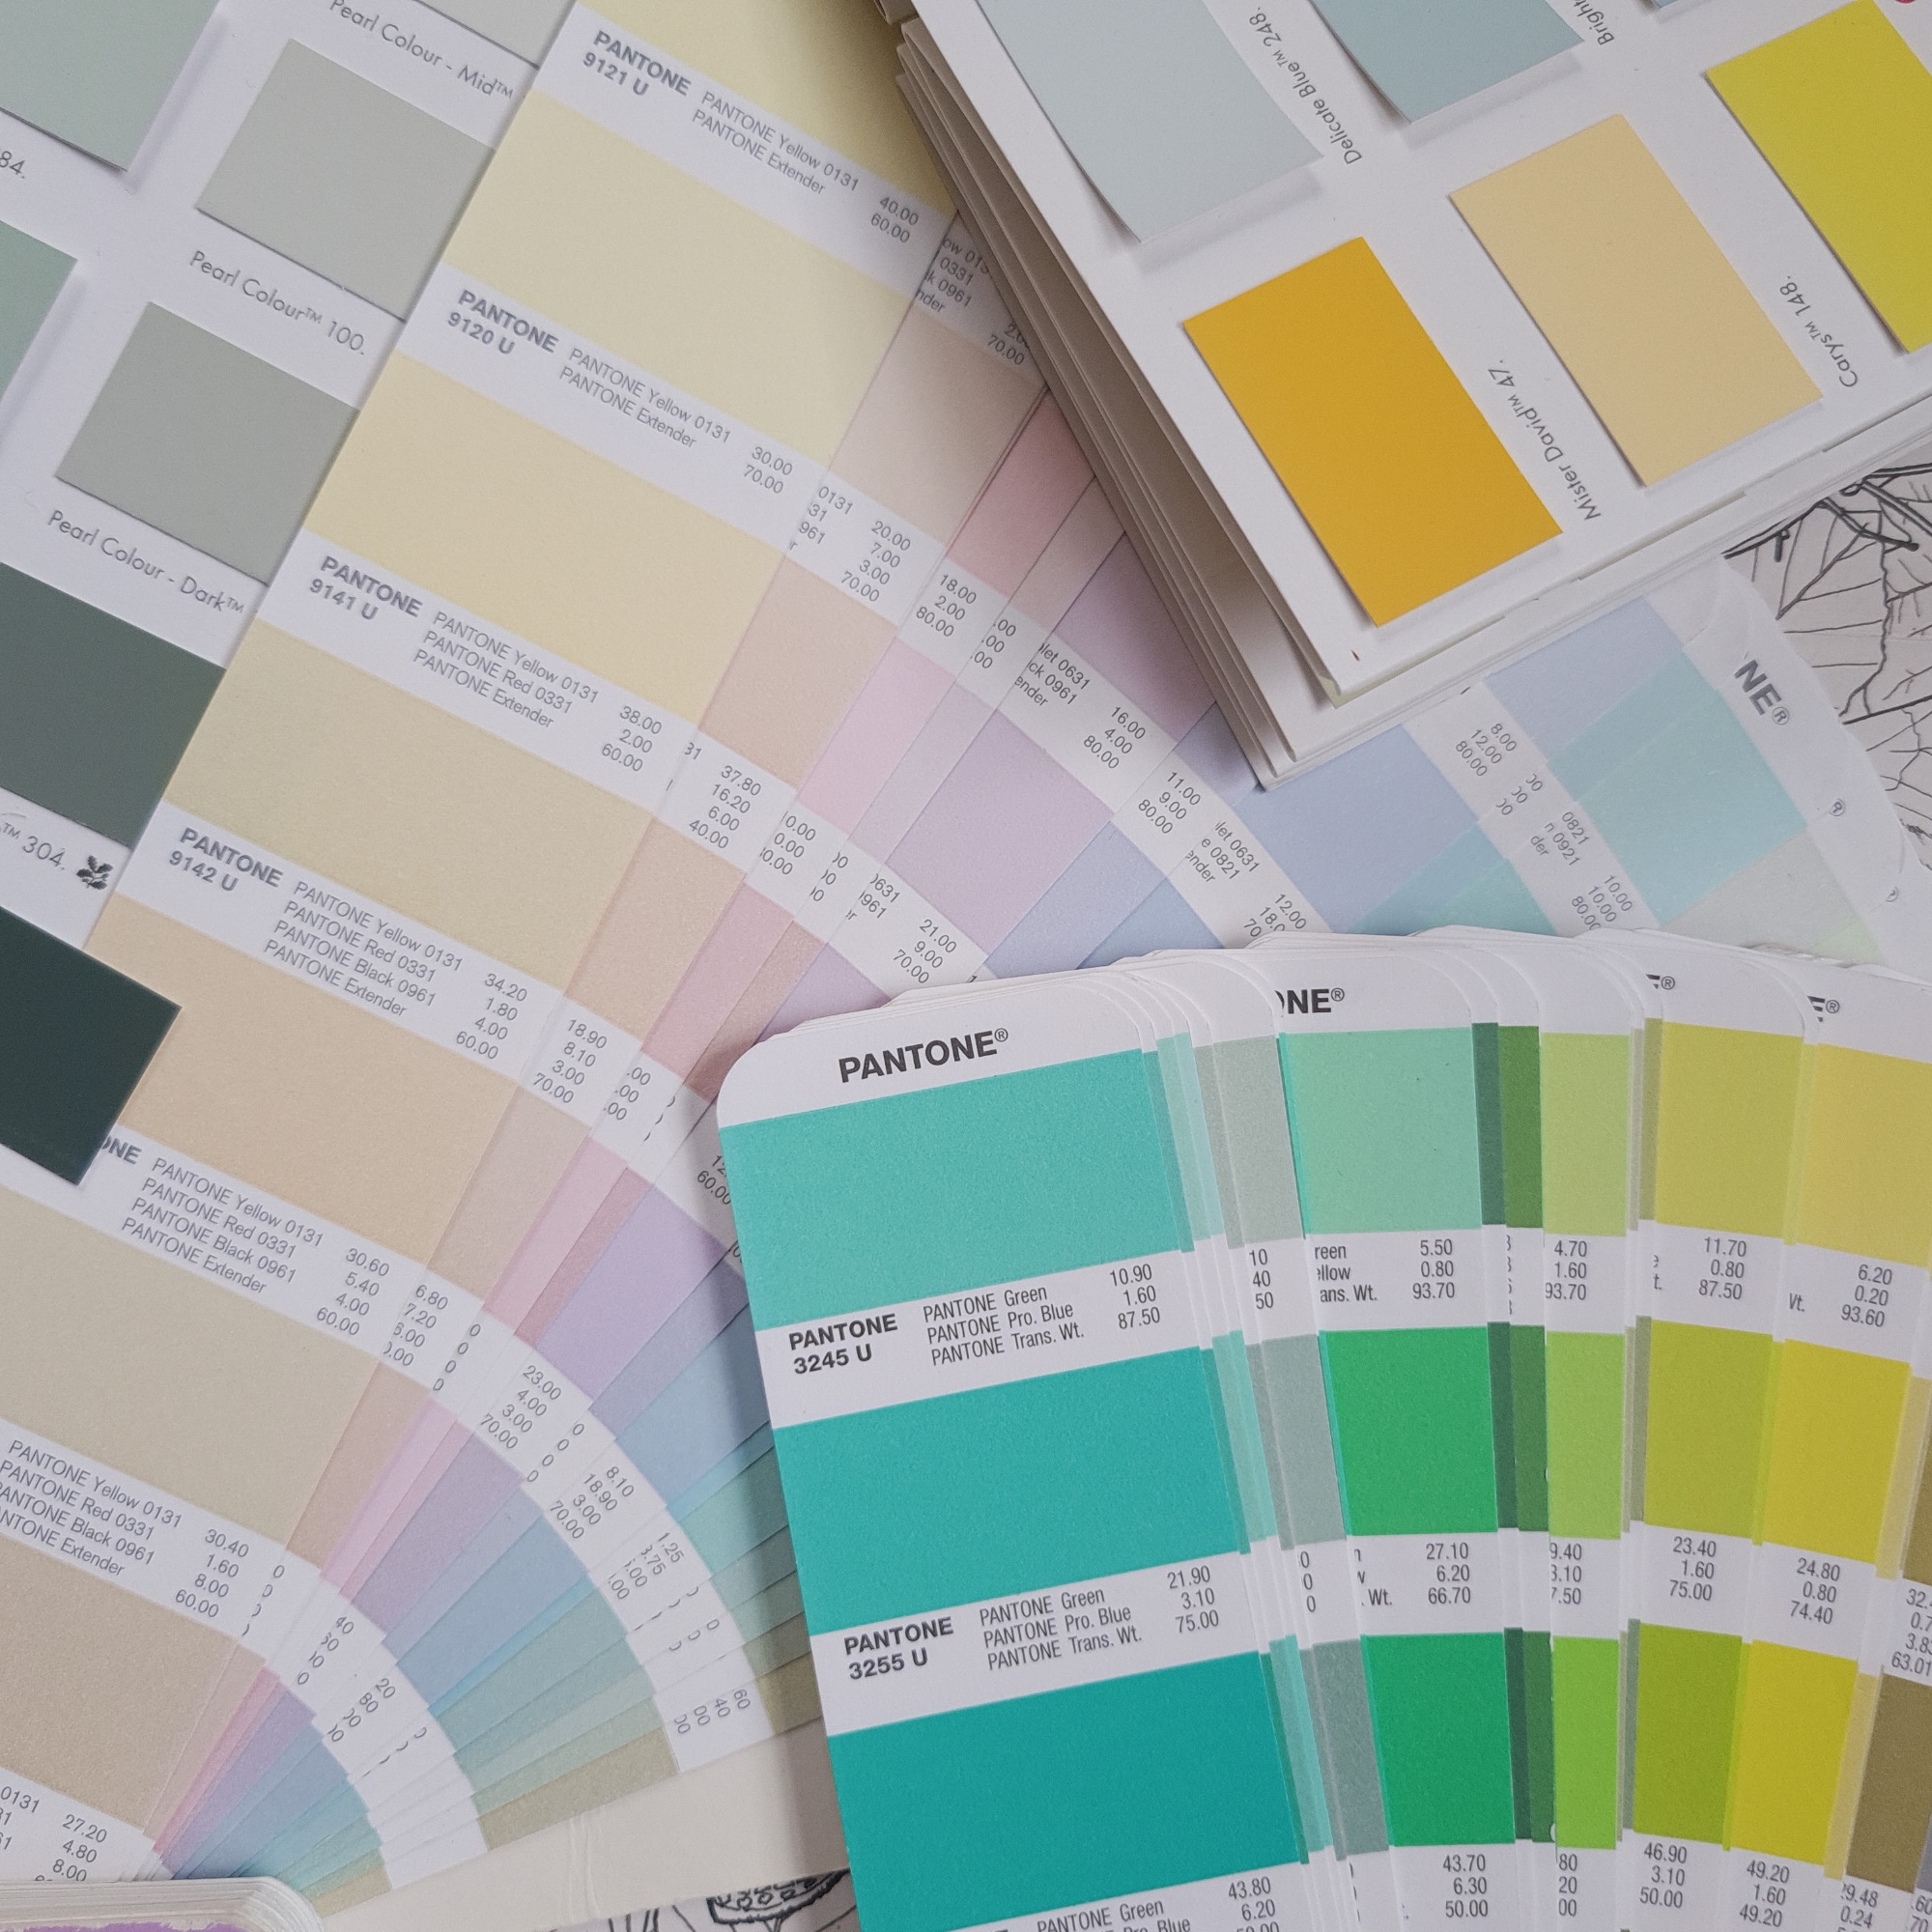 Pantone colour books and paint swatches